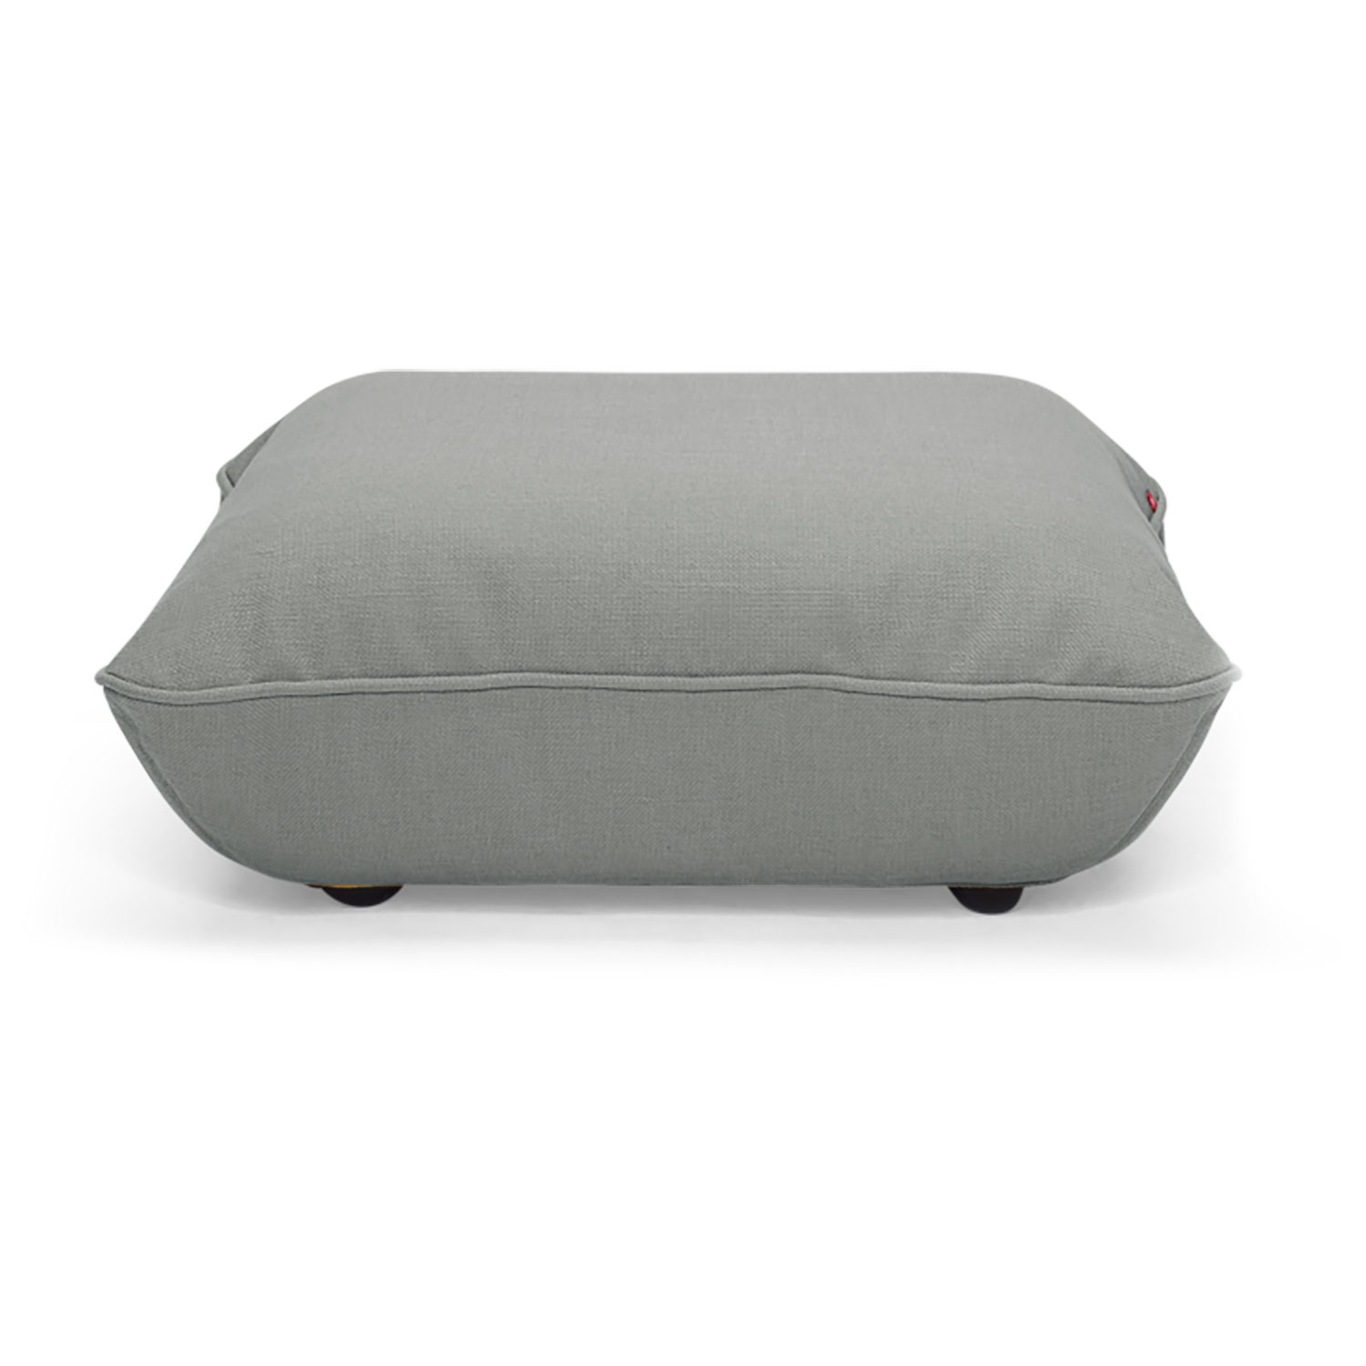 Sumo Footstool, Mouse Grey